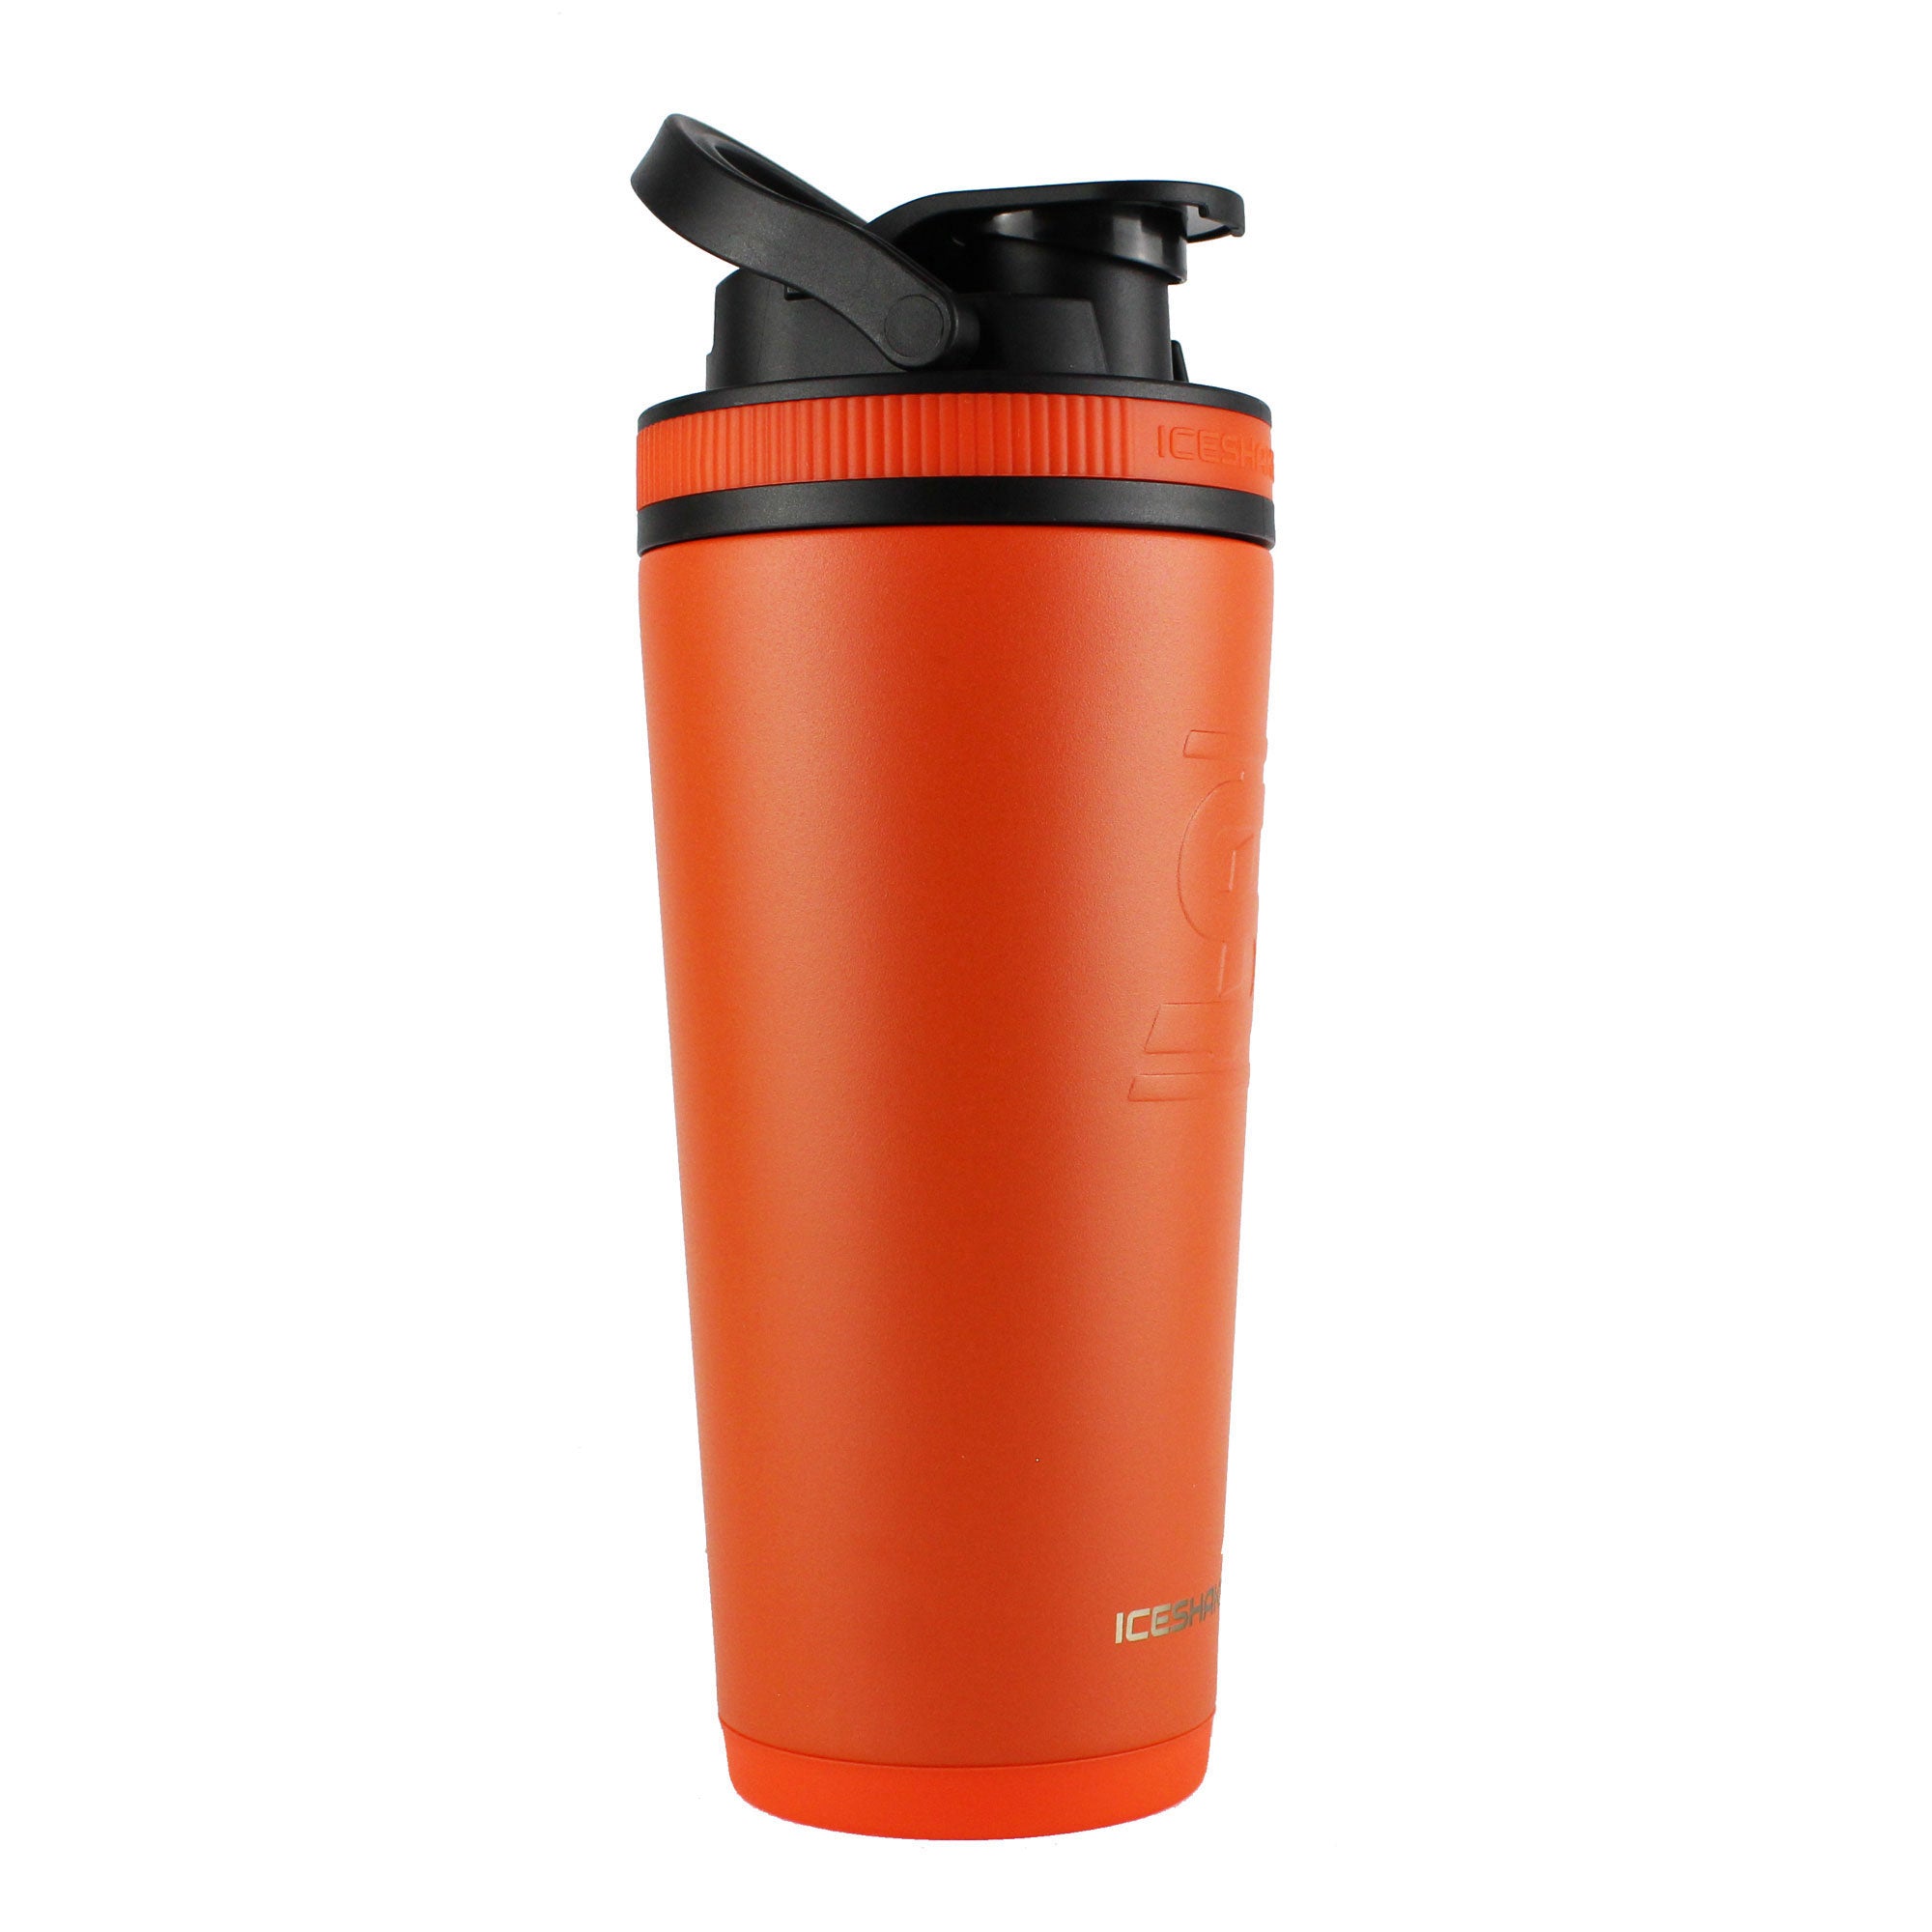 Officially Licensed Cleveland Browns 26oz Ice Shaker - Orange